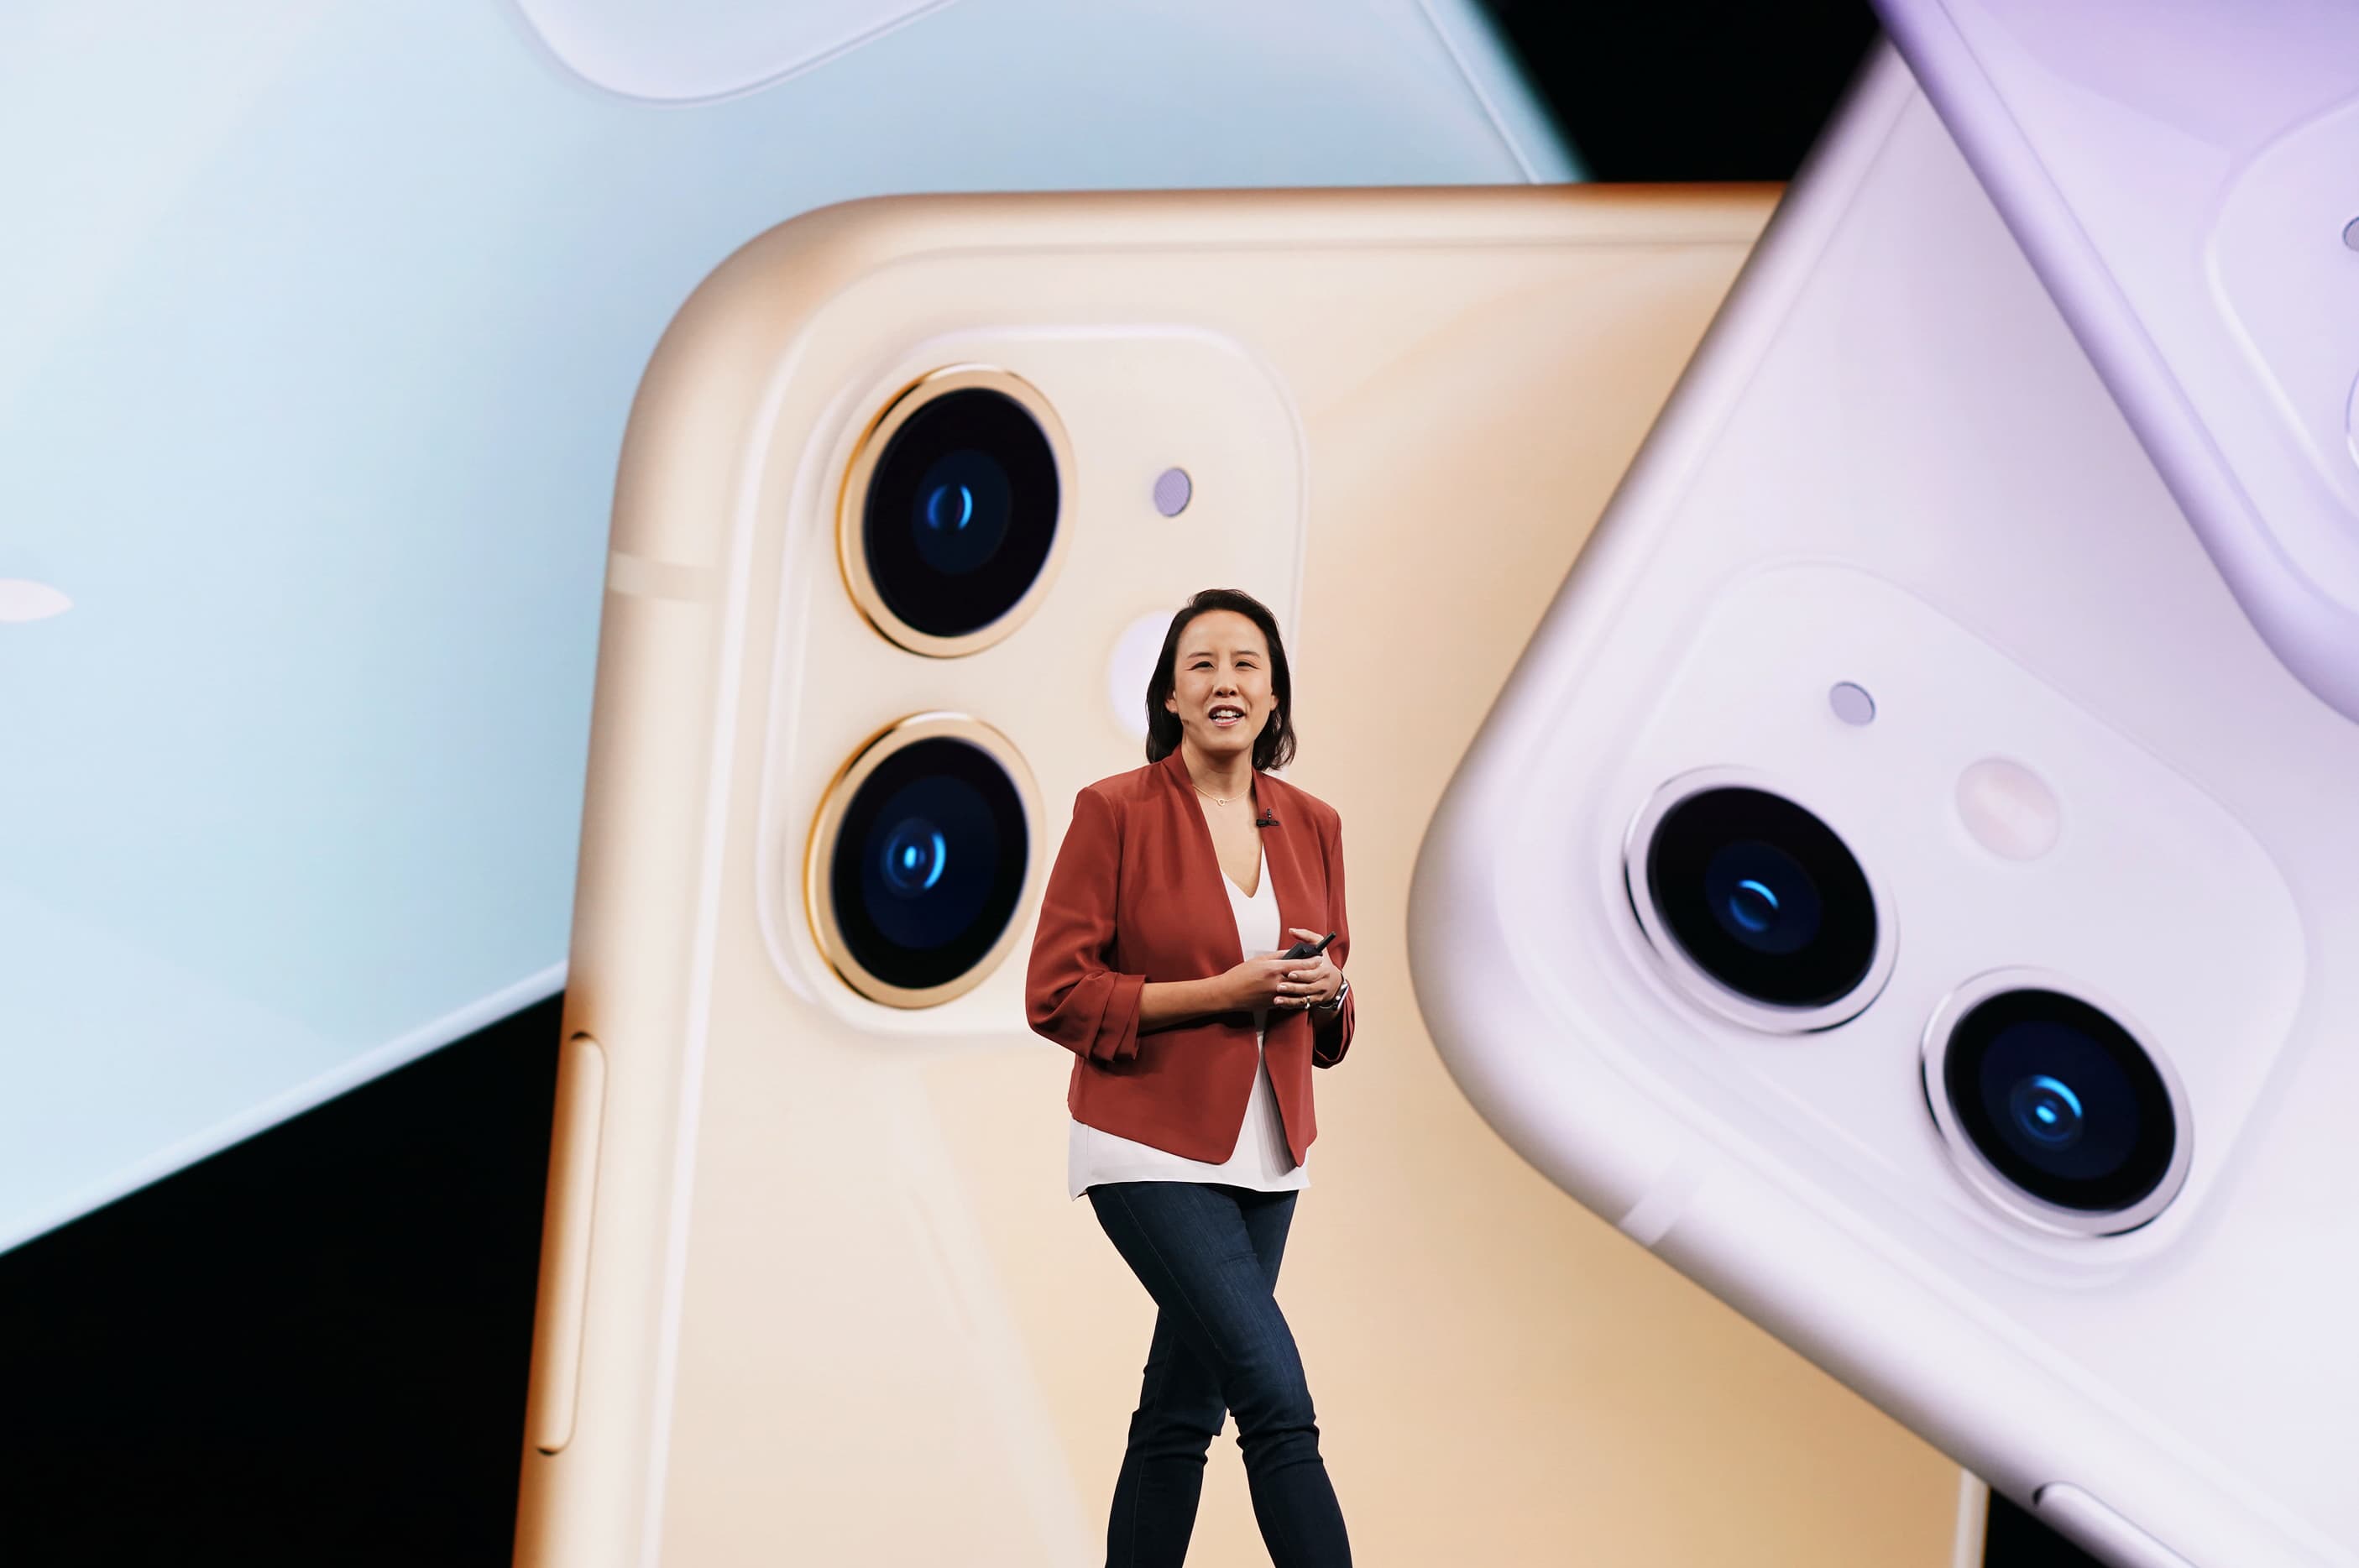 Apple marketing exec Kaiann Drance shows off the iPhone 11 during the By Innovation Only event.